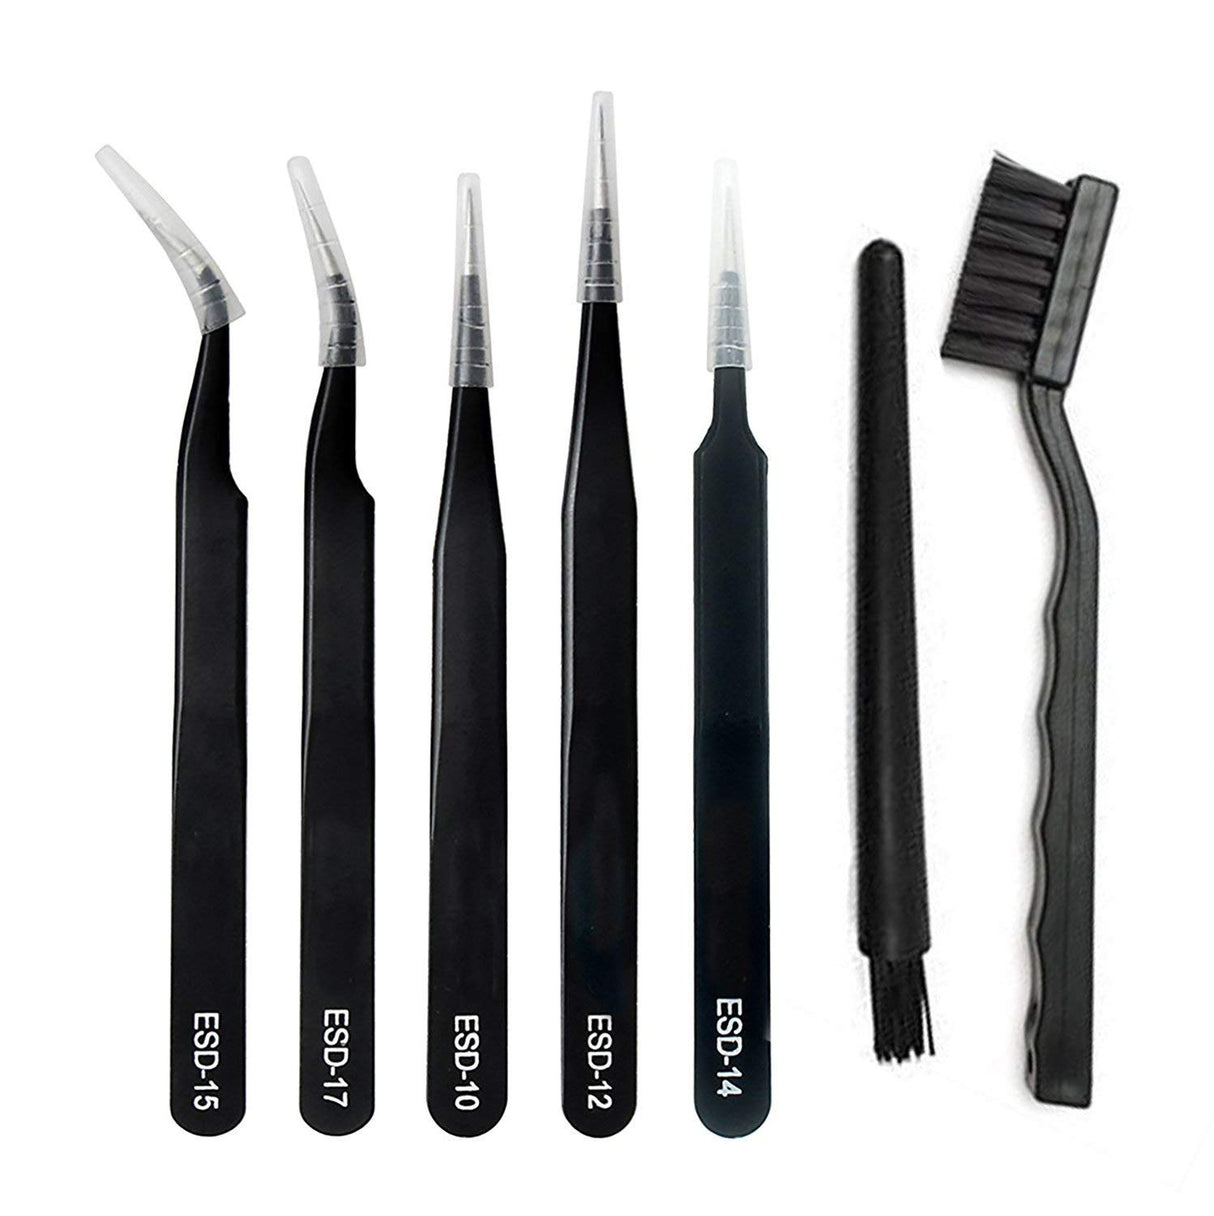 SCHOFIC 7 Pcs ESD Anti-Static Tool Tweezers Set, Made of Stainless Steel With ESD Brush - Black